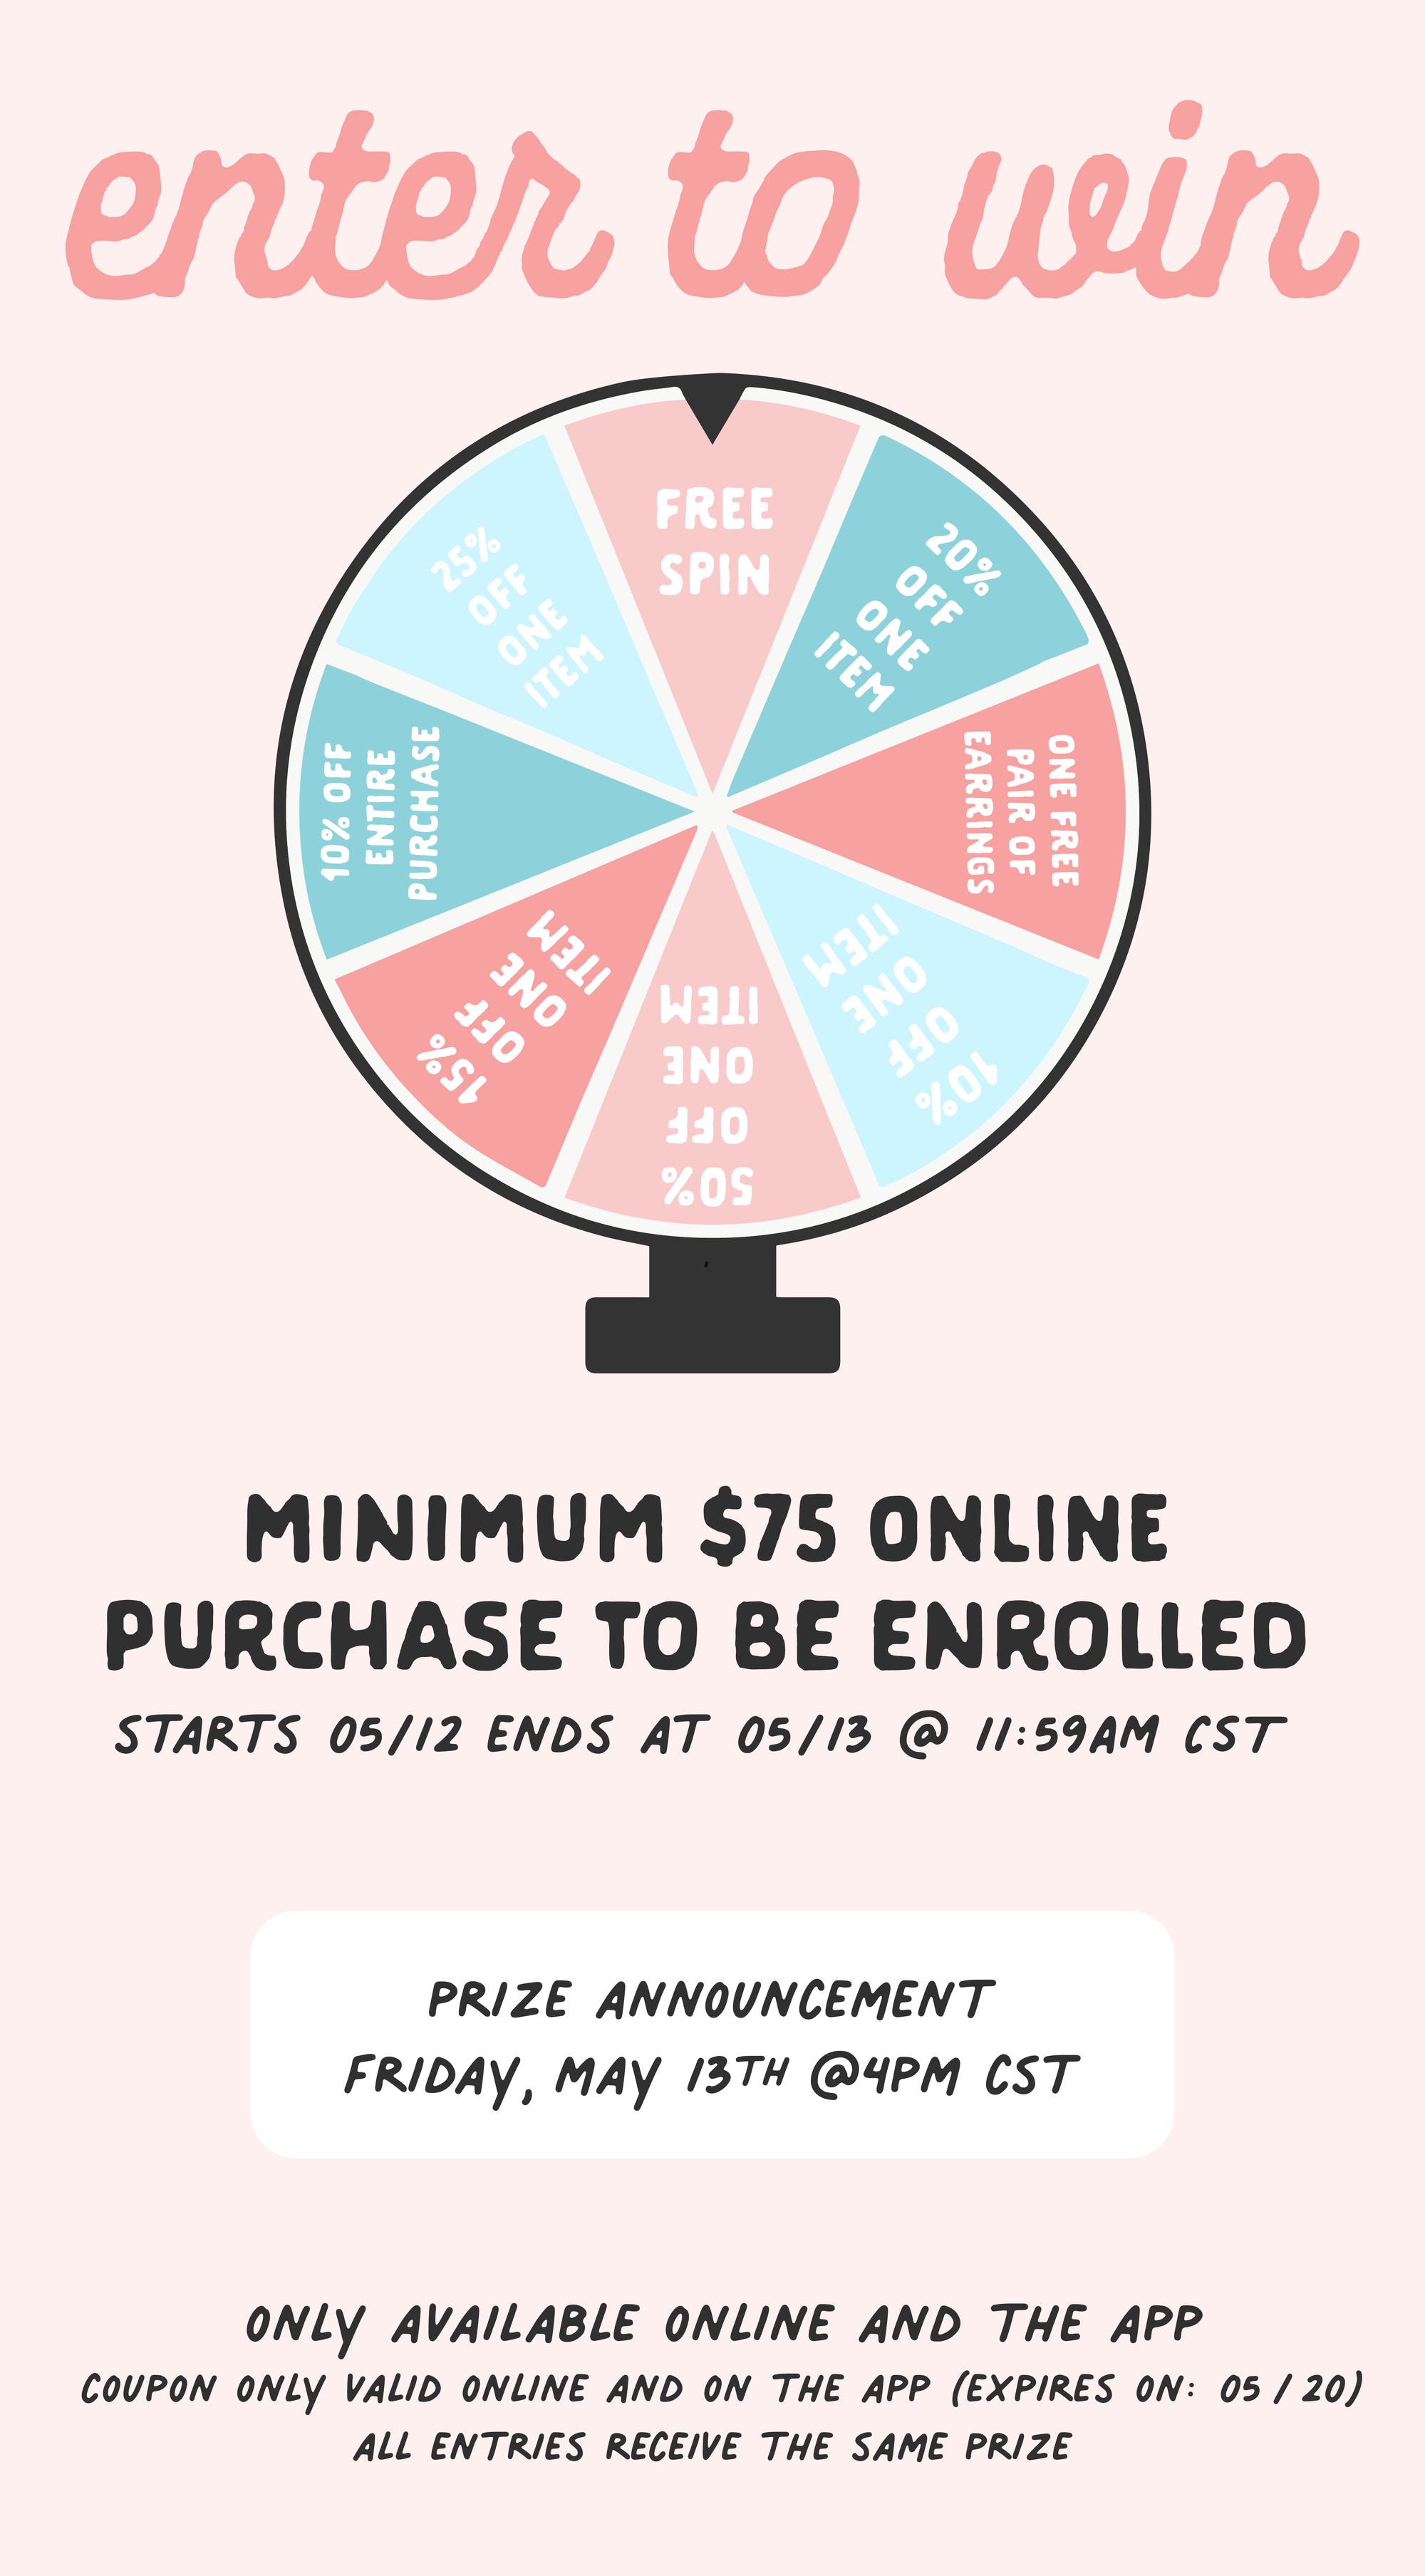 ENTIRE PURCHASE - w P L MINIMUM $75 ONLINE PURCHASE TO BE ENROLLED STARTS 0512 ENDS AT 0513 @ 1:59AM ST PRIZE ANNOUNCEMENT FRIDAY, MAY I3TH @4PM CST ONLY AVAILABLE ONLINE AND THE APP COUPON ONLY VALID ONLINE AND ON THE APP EXPIRES ON: 05 20 ALL ENTRIES RECEIVE THE SAME PRIZE 